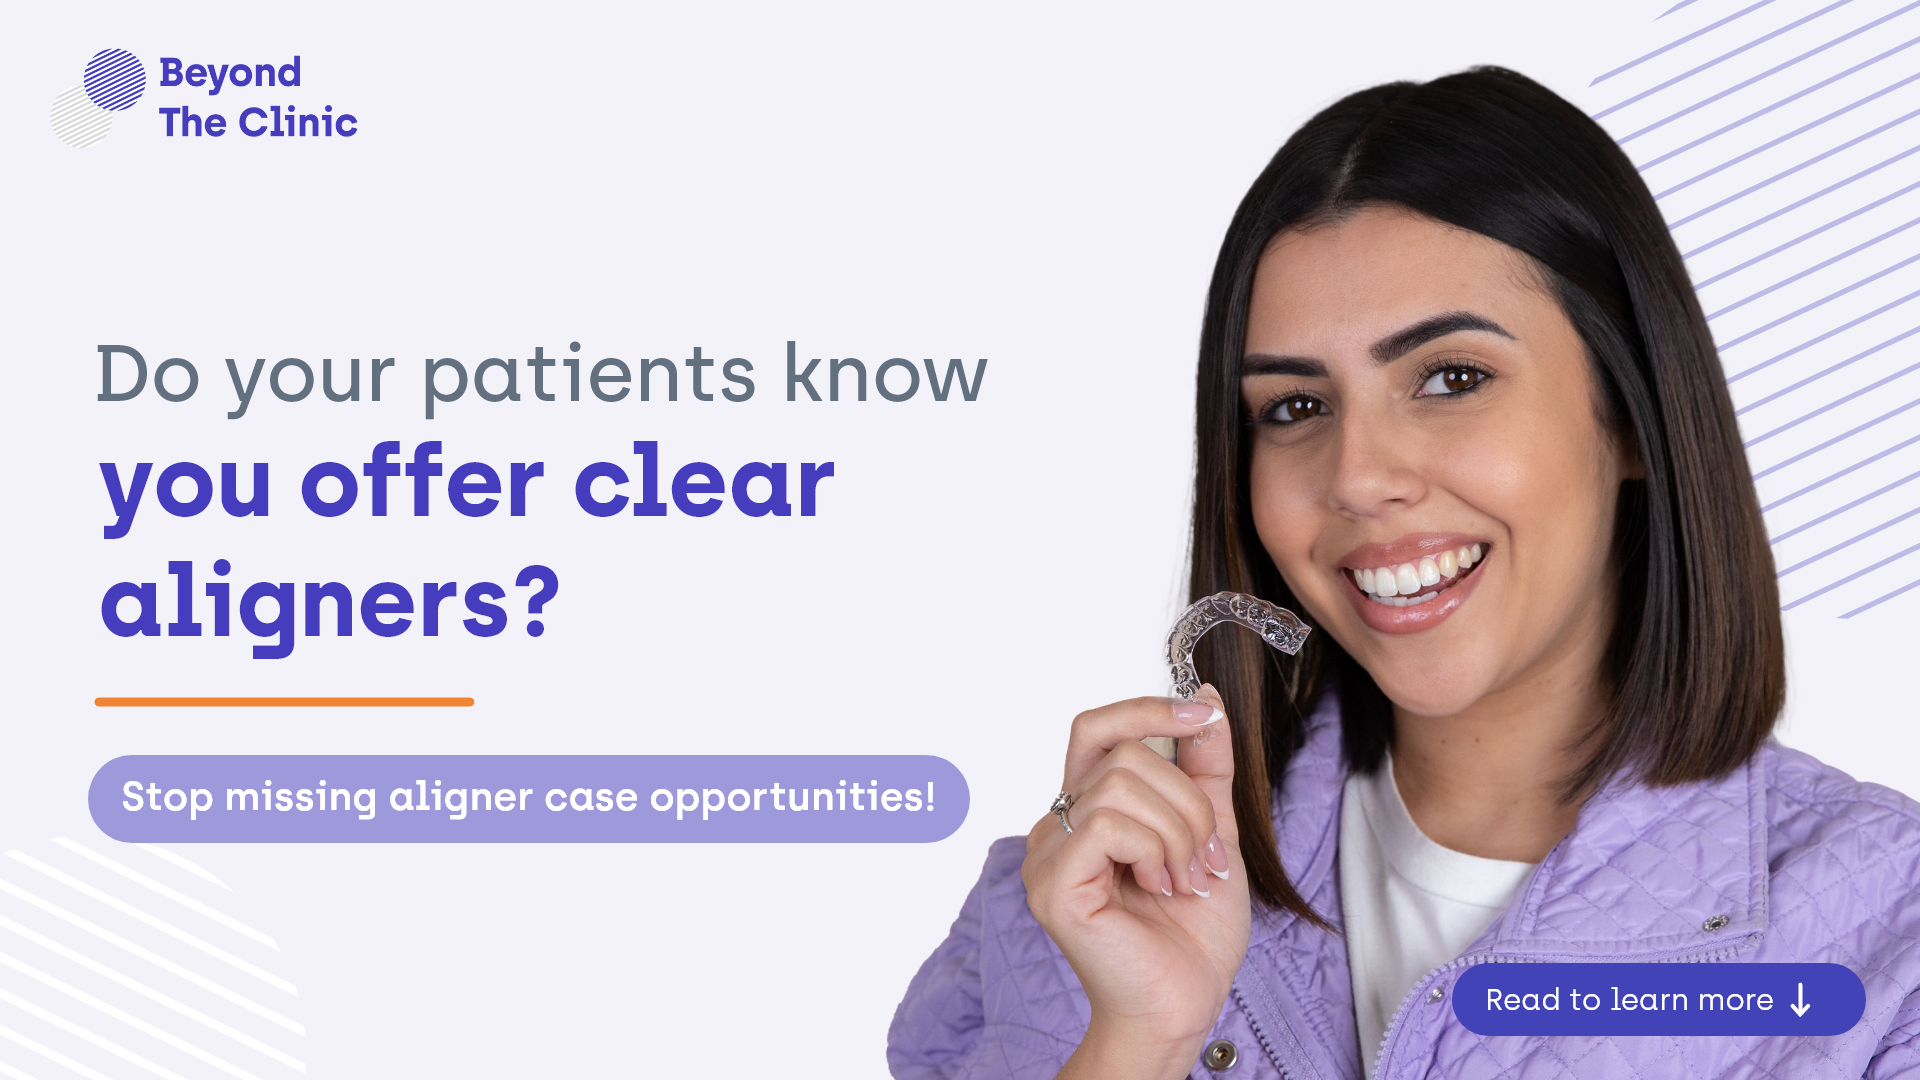 aligner cases from within your practice